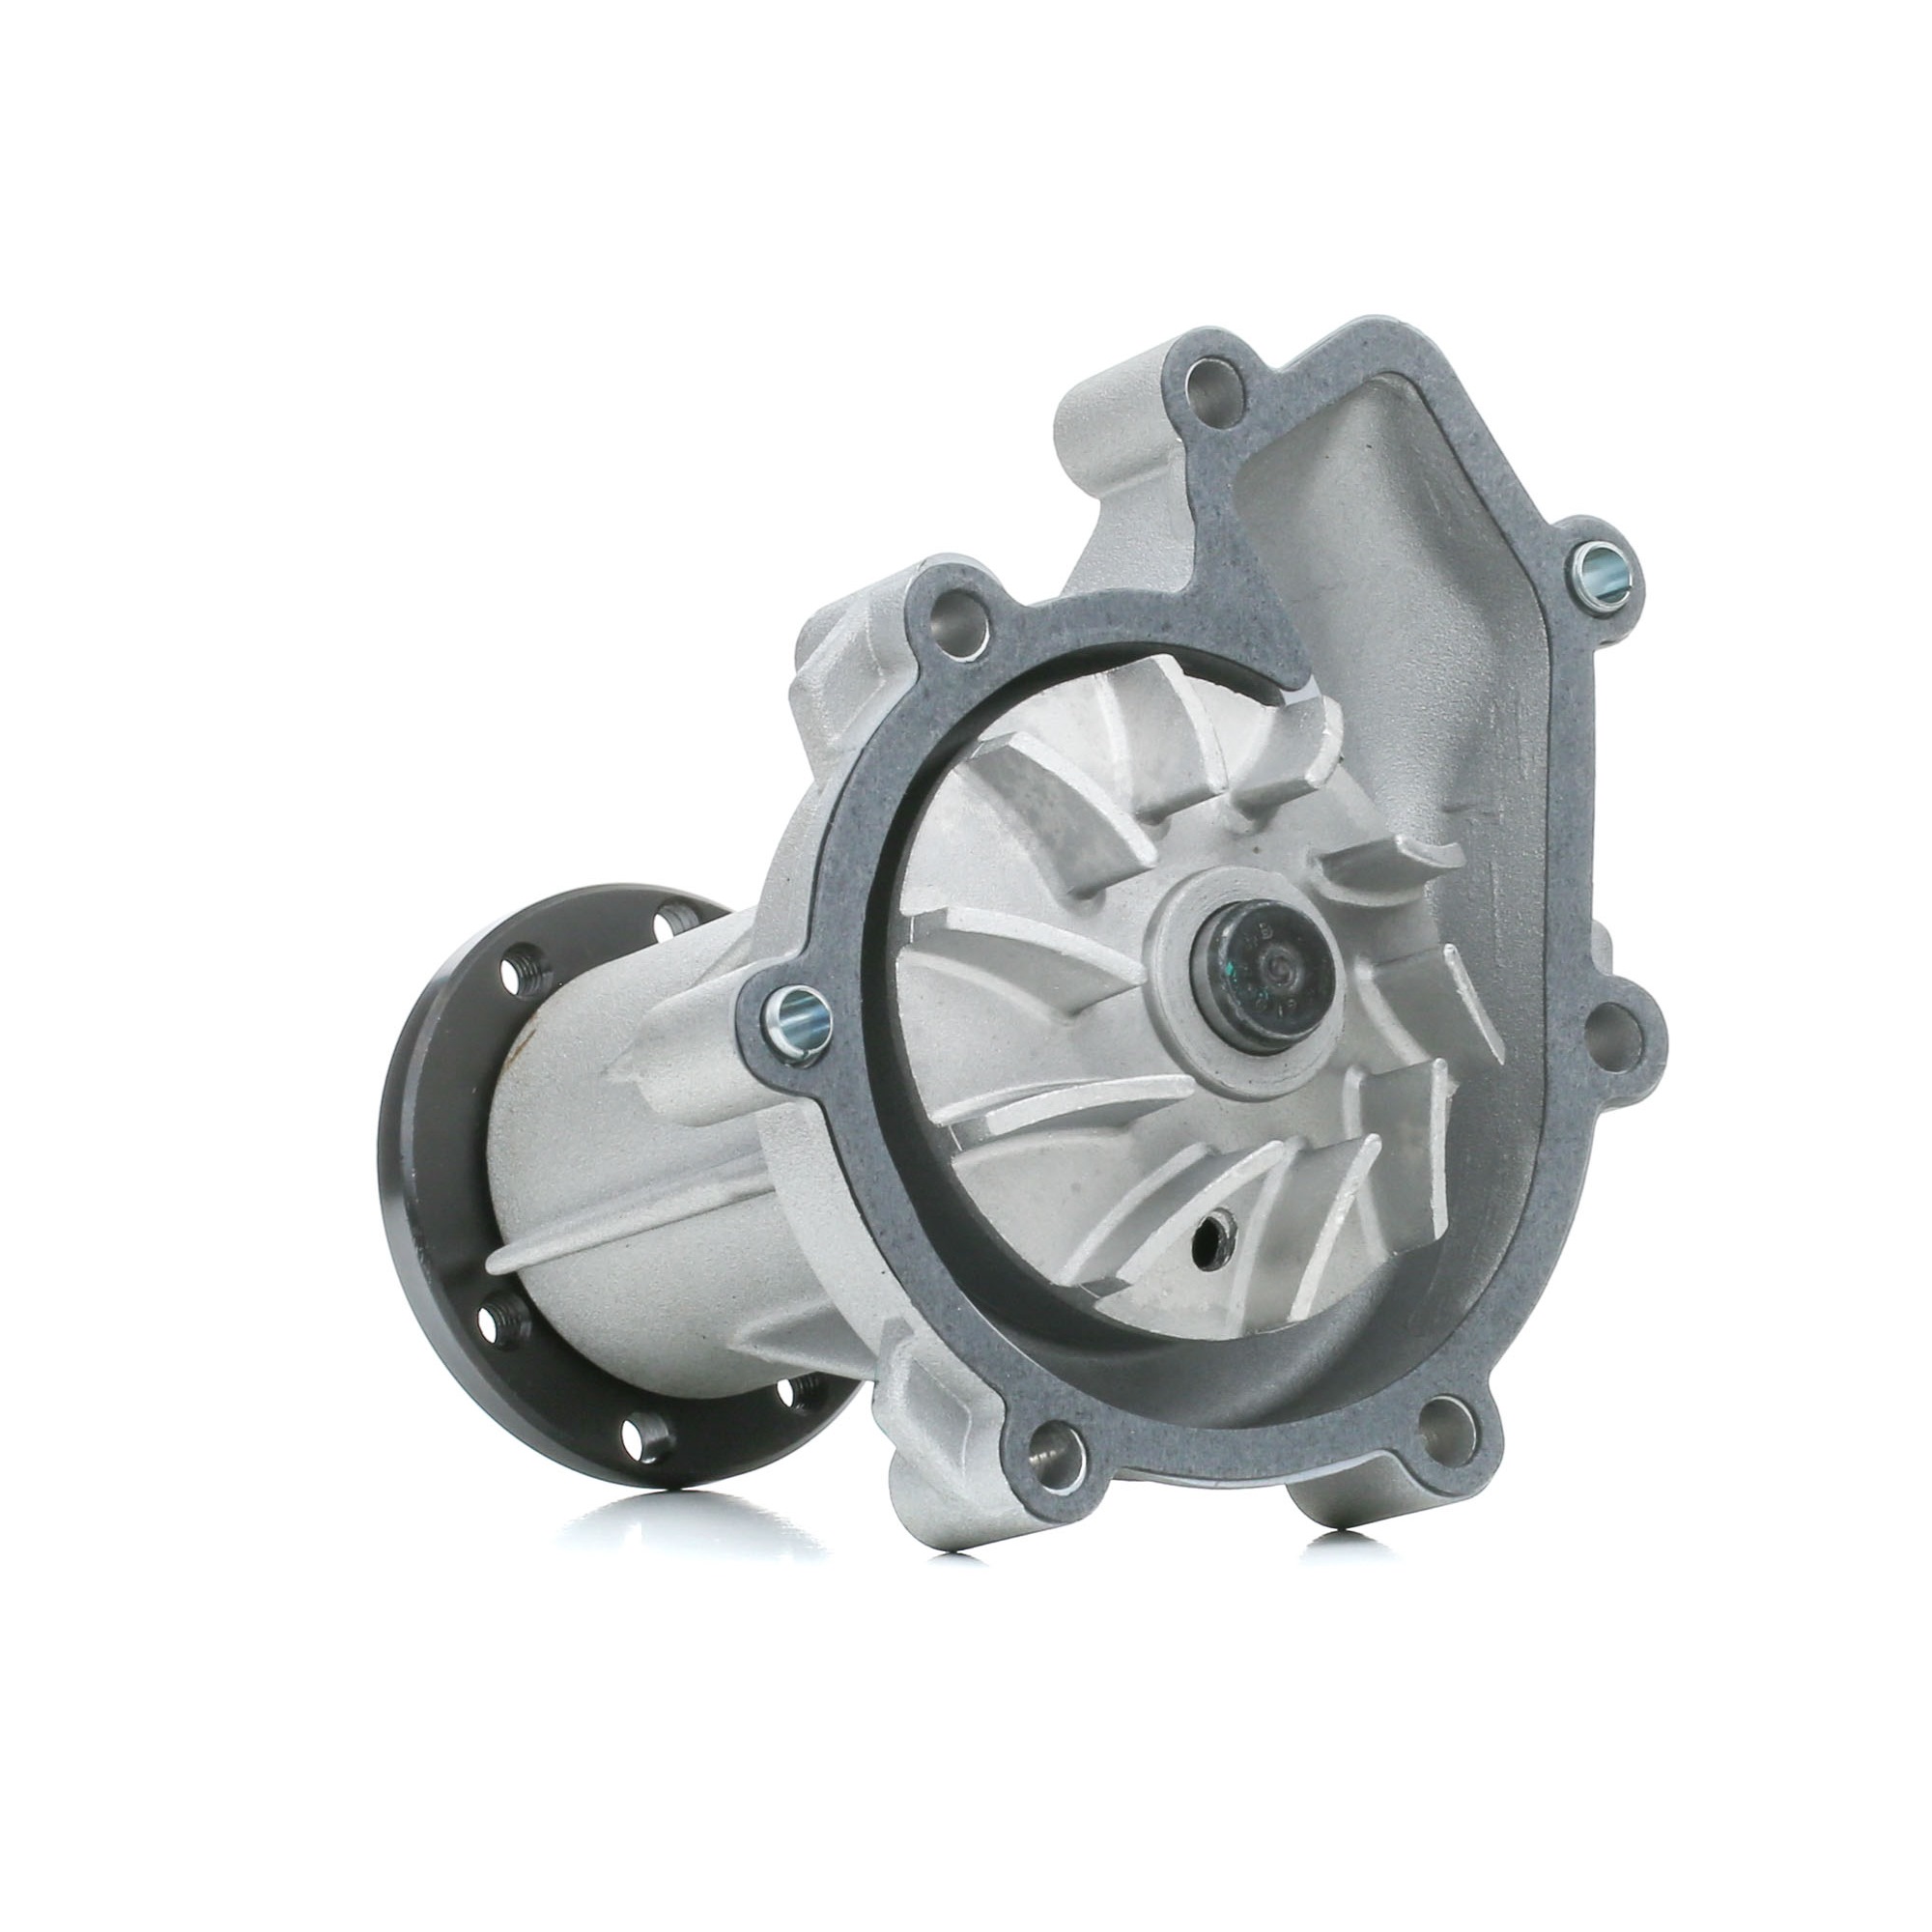 STARK SKWP-0520216 Water pump Cast Aluminium, without belt pulley, with seal, with flange, Mechanical, Metal impeller, for v-ribbed belt use